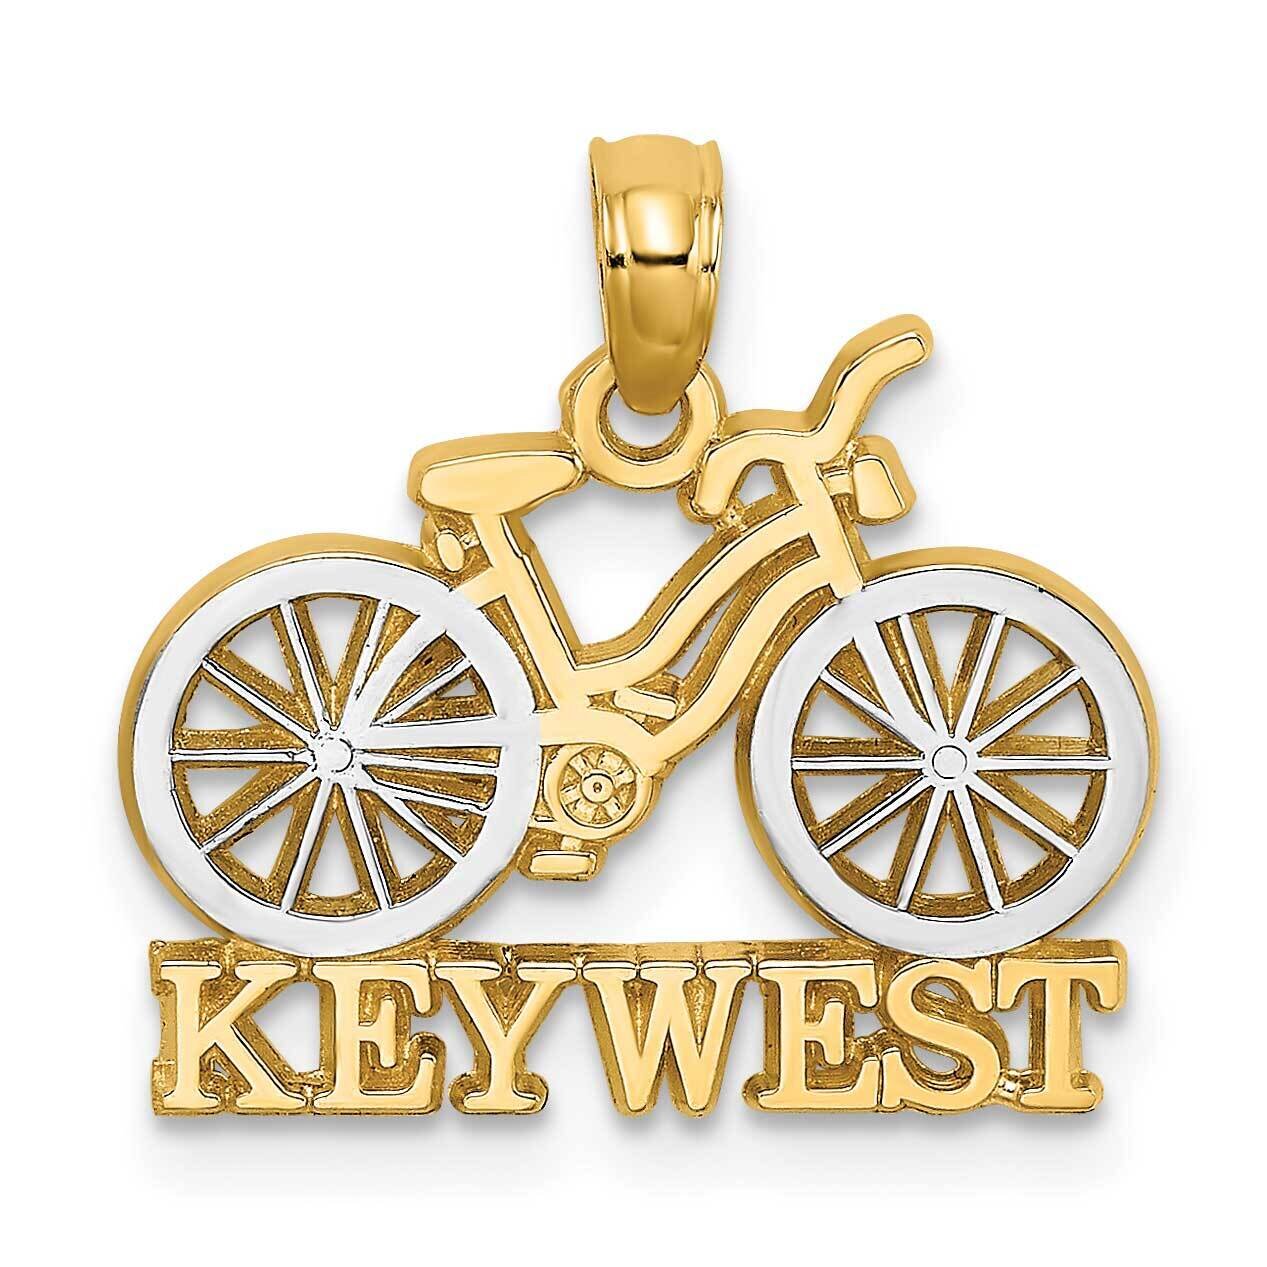 Key West Under Bicycle with White Tires 14k Gold Rhodium K9501